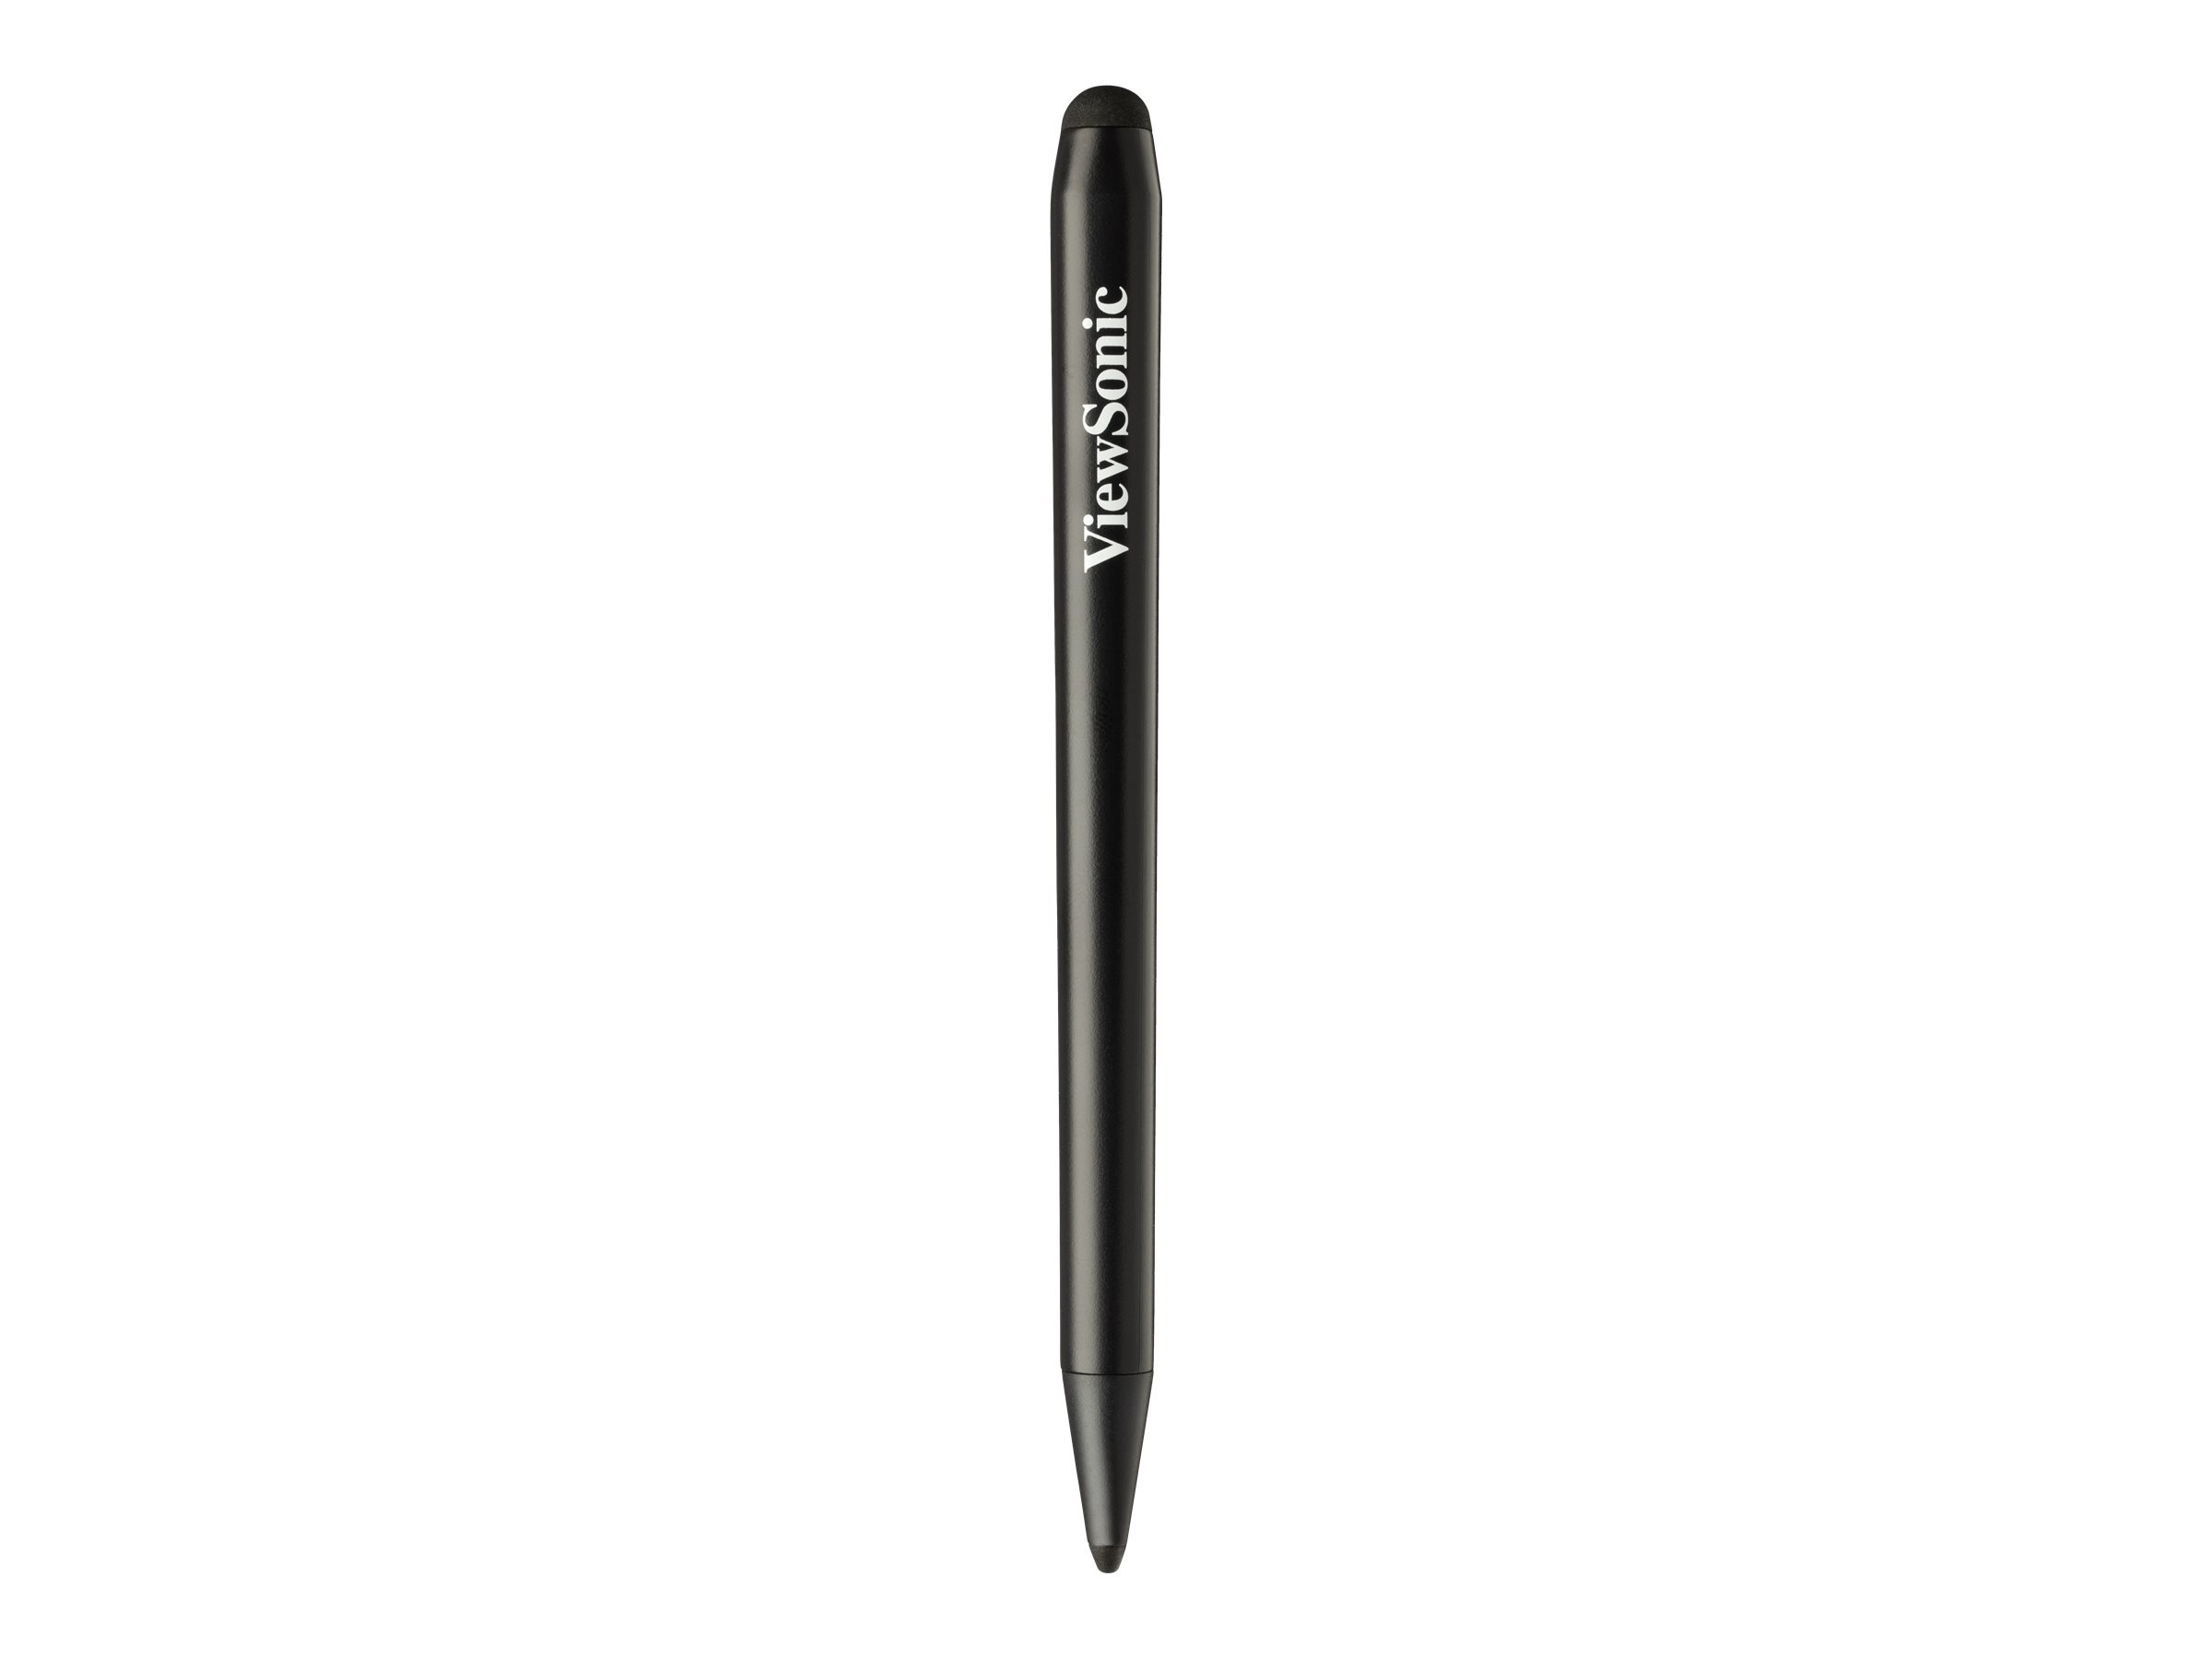 VIEWSONIC VB-PEN-009 Stylist pen for IFP50-2 and IFP30 series